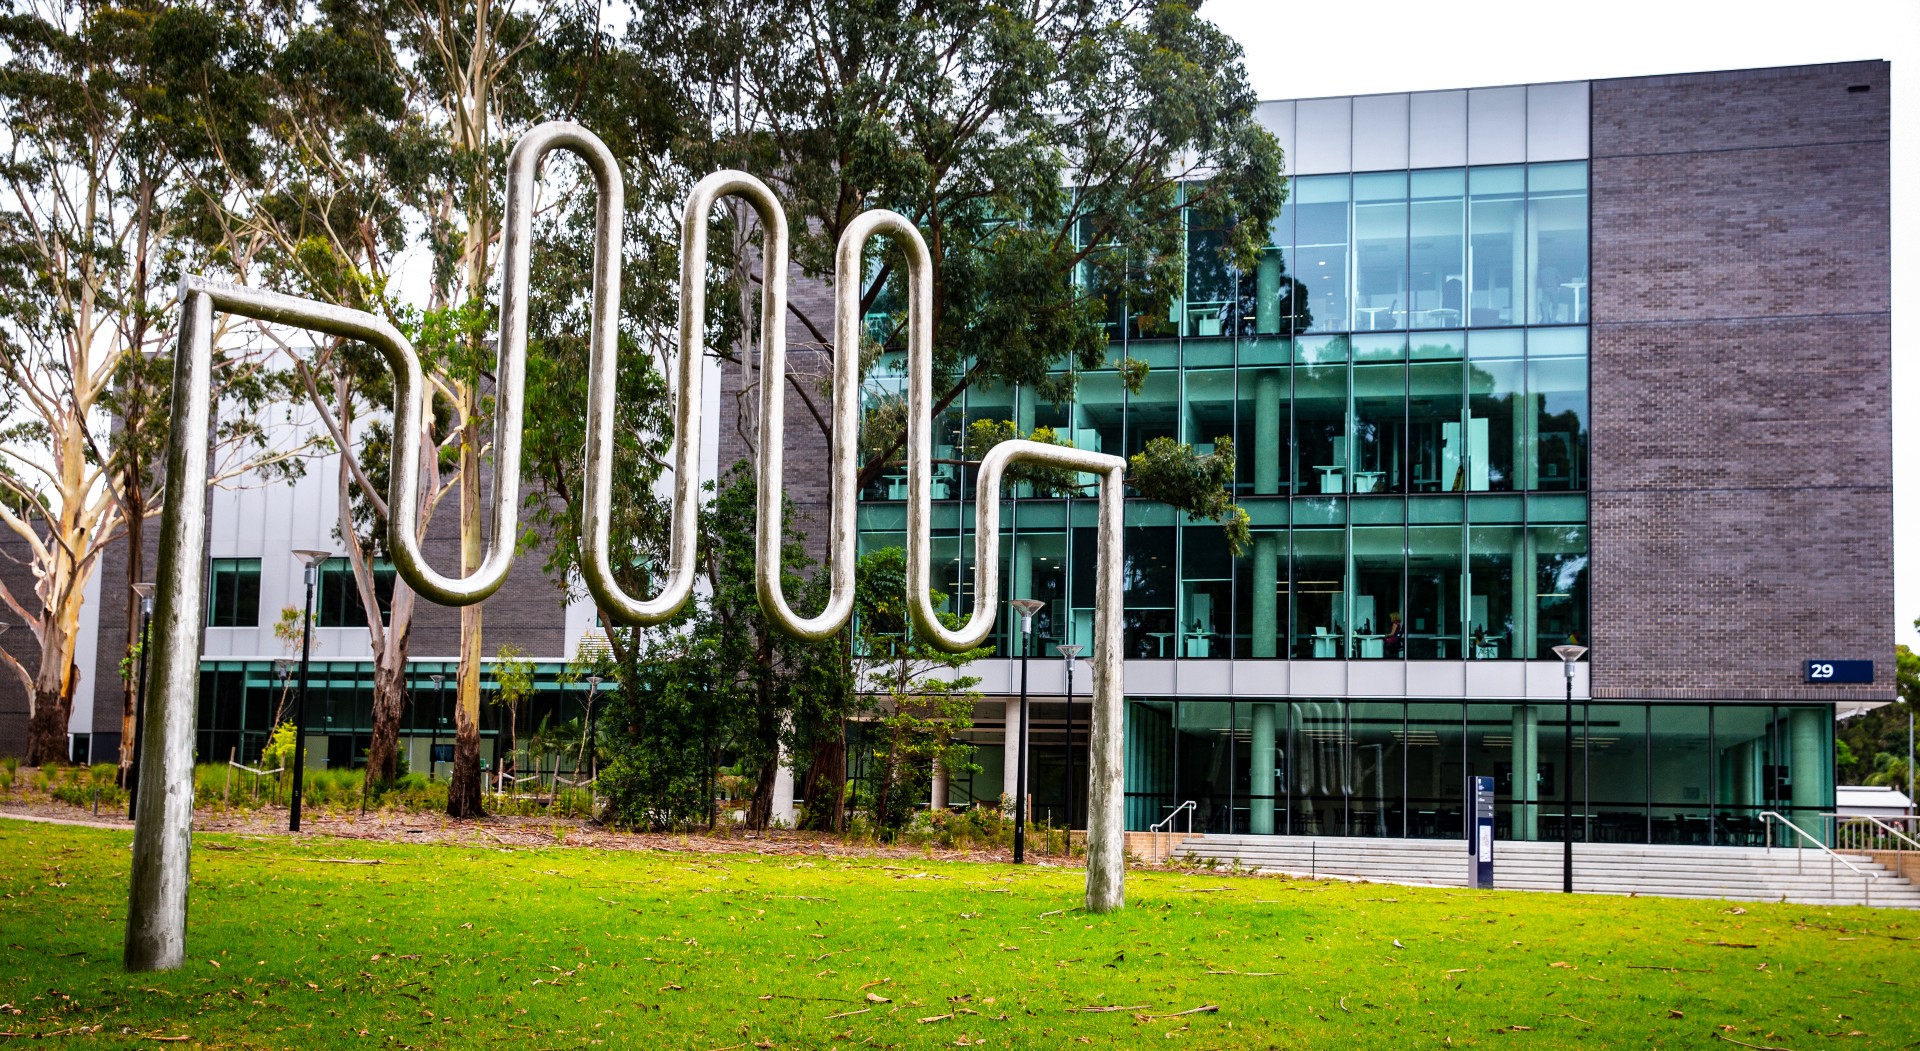 An image of a sculpture in the foreground, with the Jillian Broadbent Building in the background, on UOW's Wollongong campus. Photo: Paul Jones